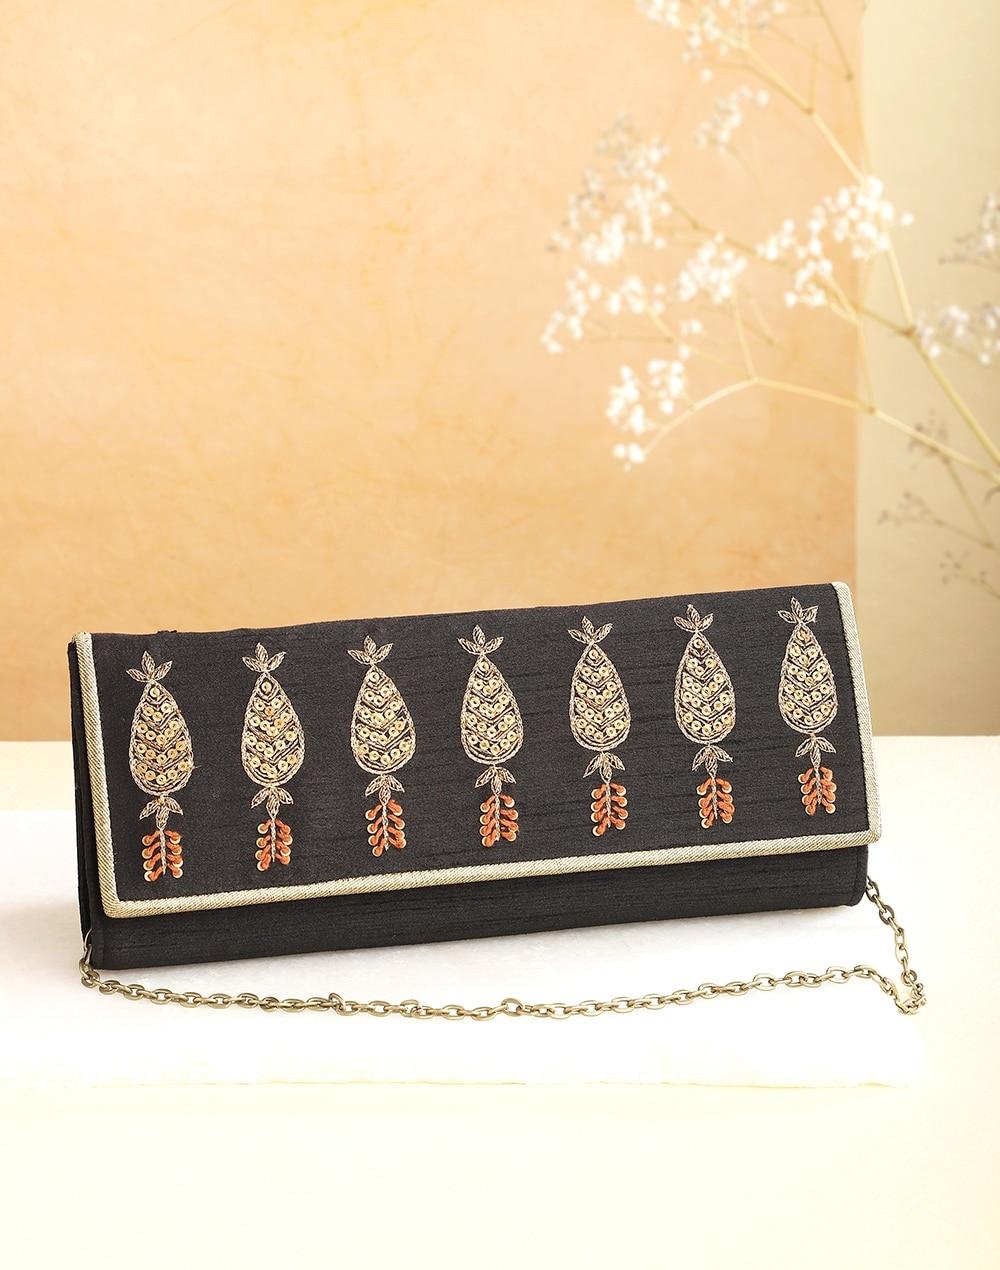 fabric embroidered clutch bag